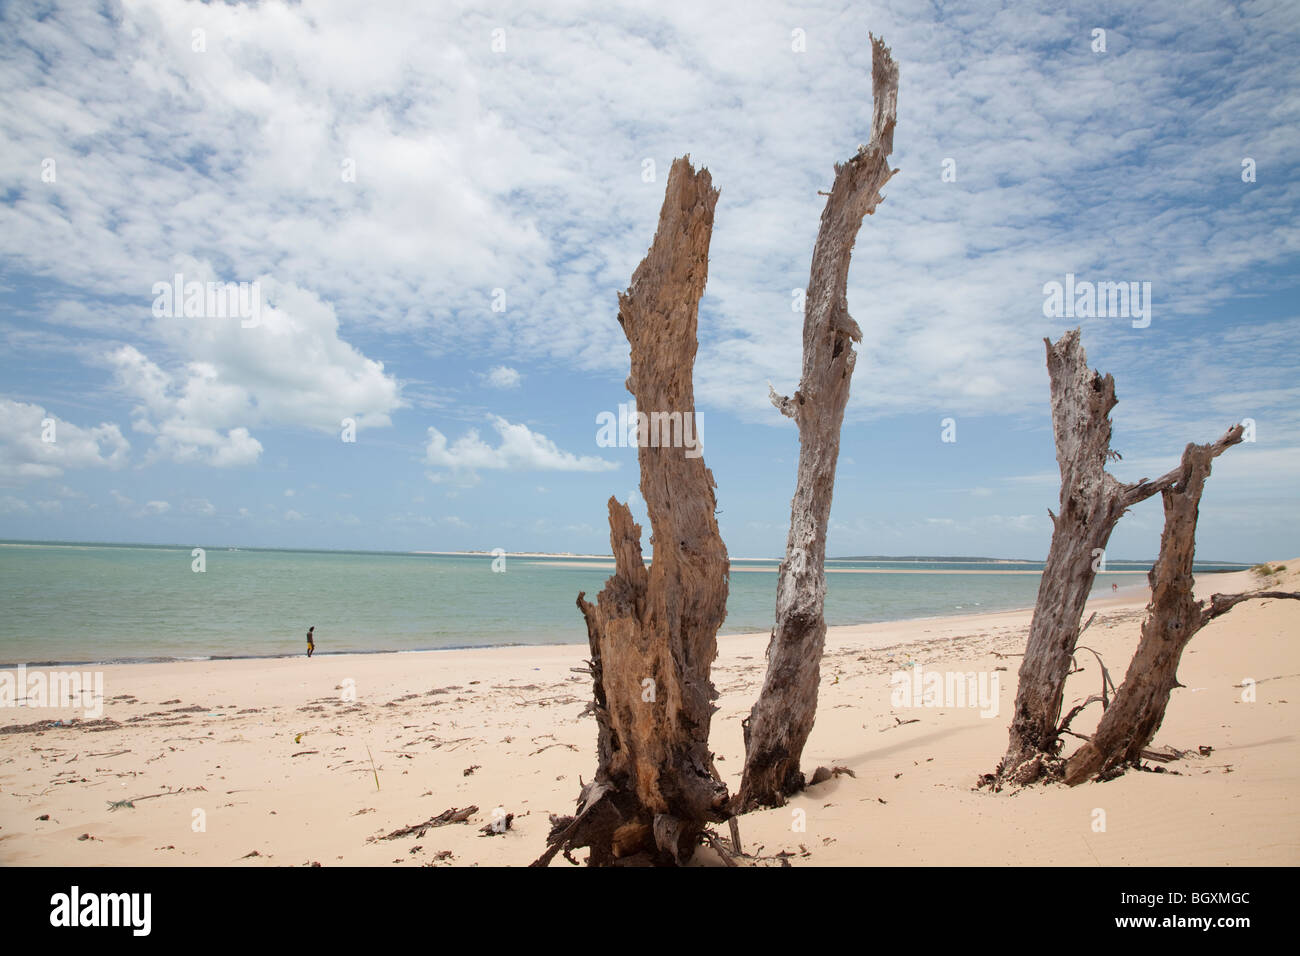 Beach and dry food on Bazaruto Island, Mozambique, East Africa Stock Photo